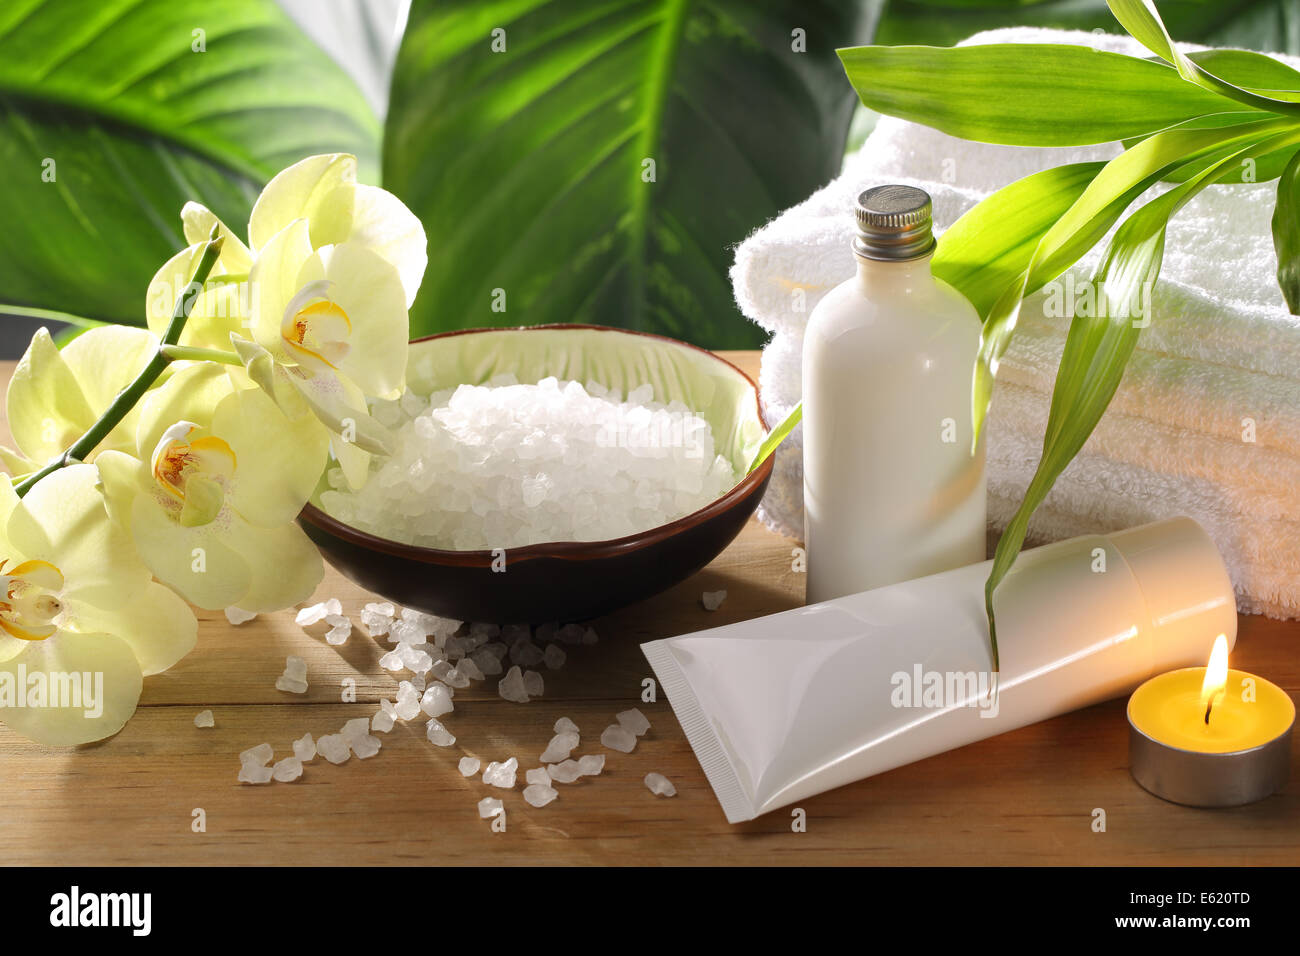 Spa still life with perfume bottles and salt Stock Photo